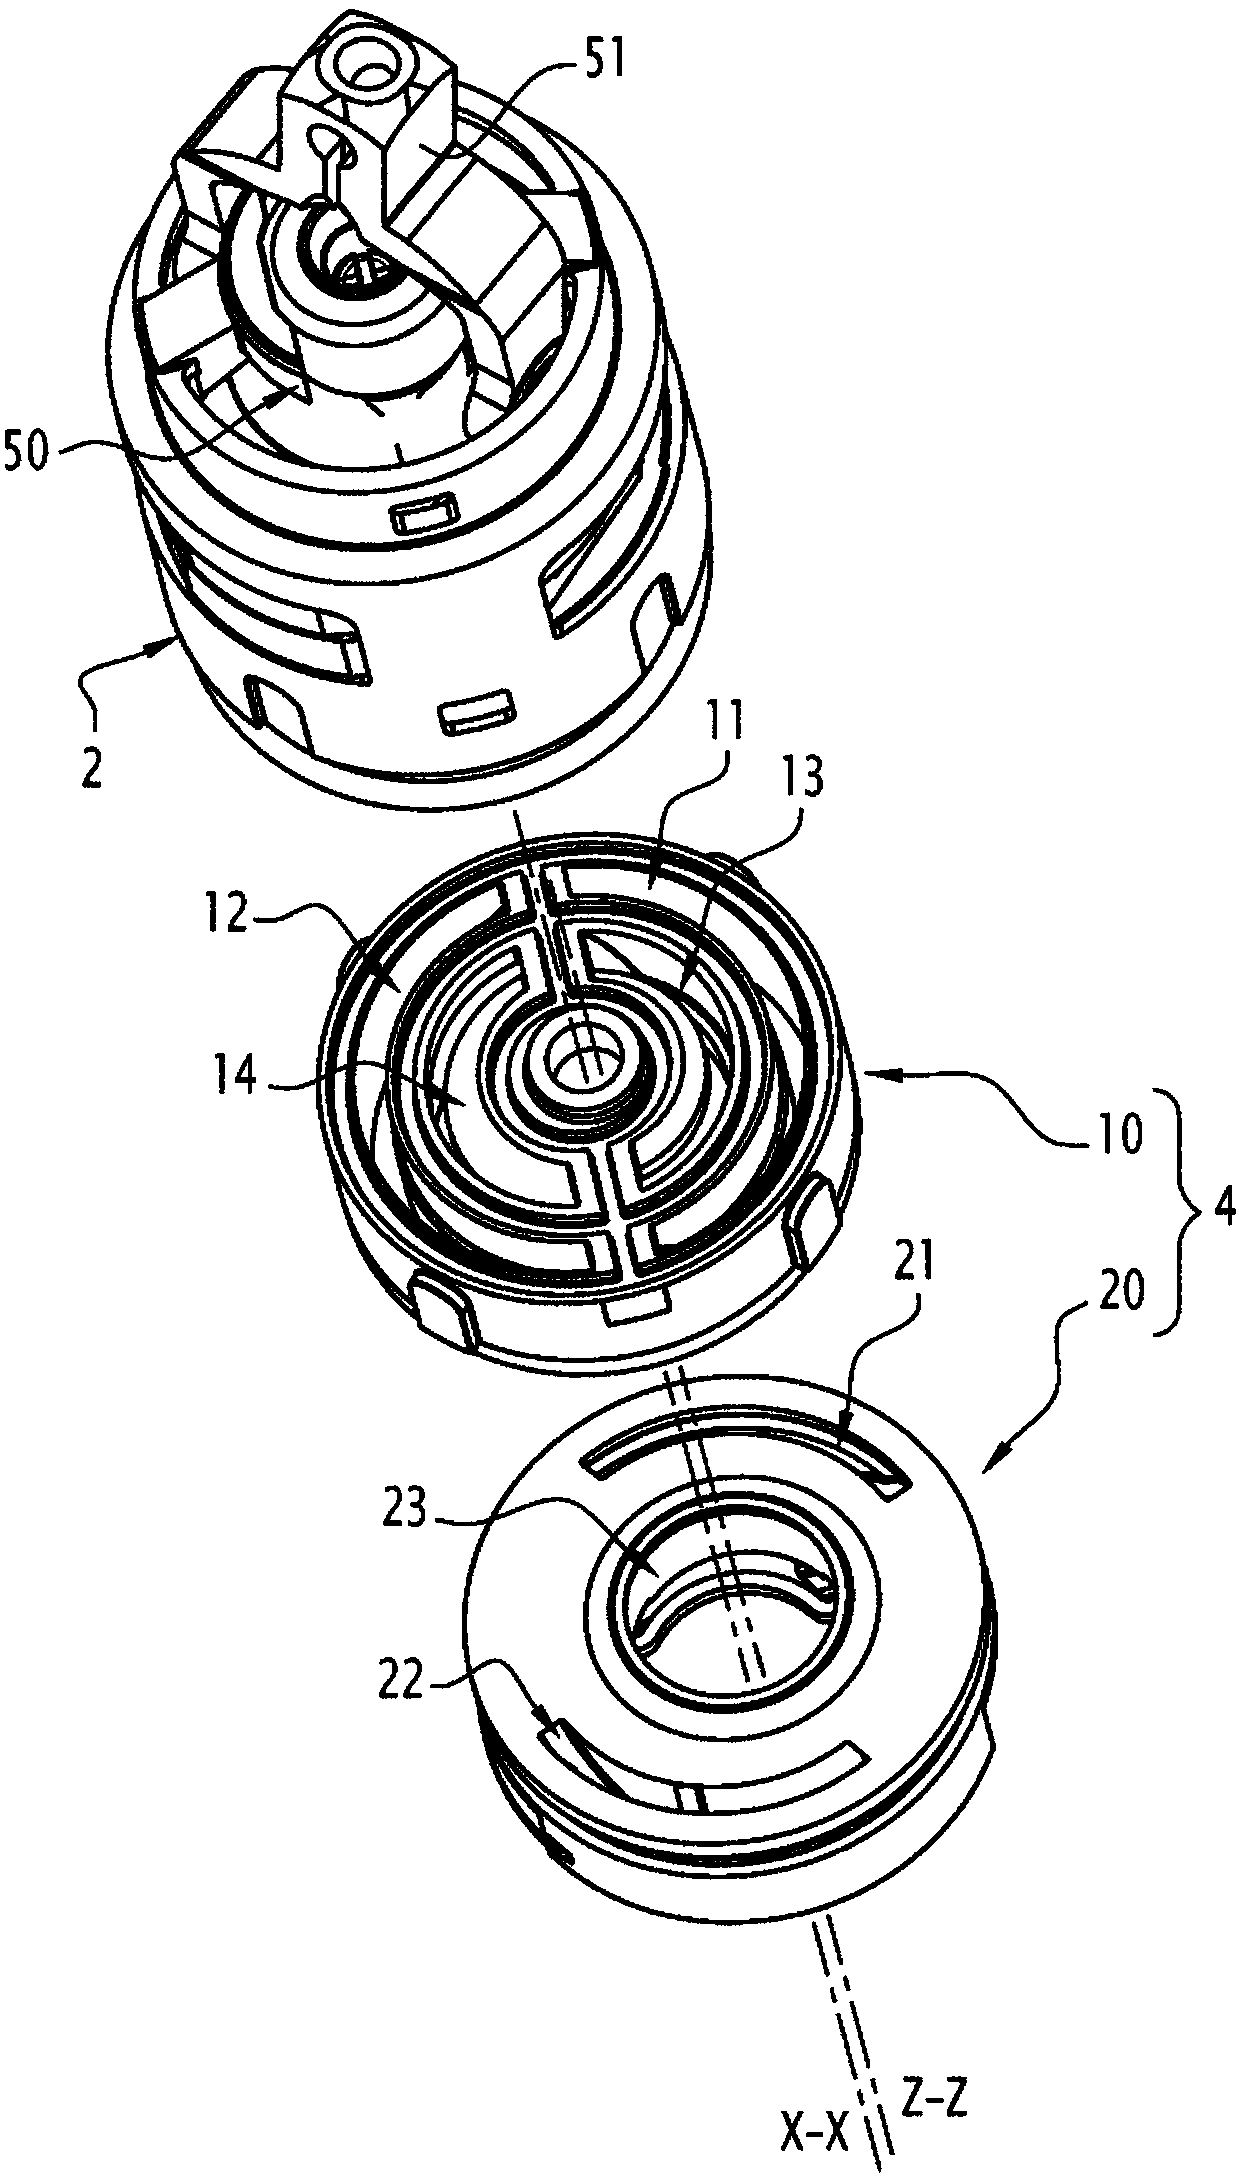 Thermostatic cartridge for controlling hot and cold fluids to be mixed